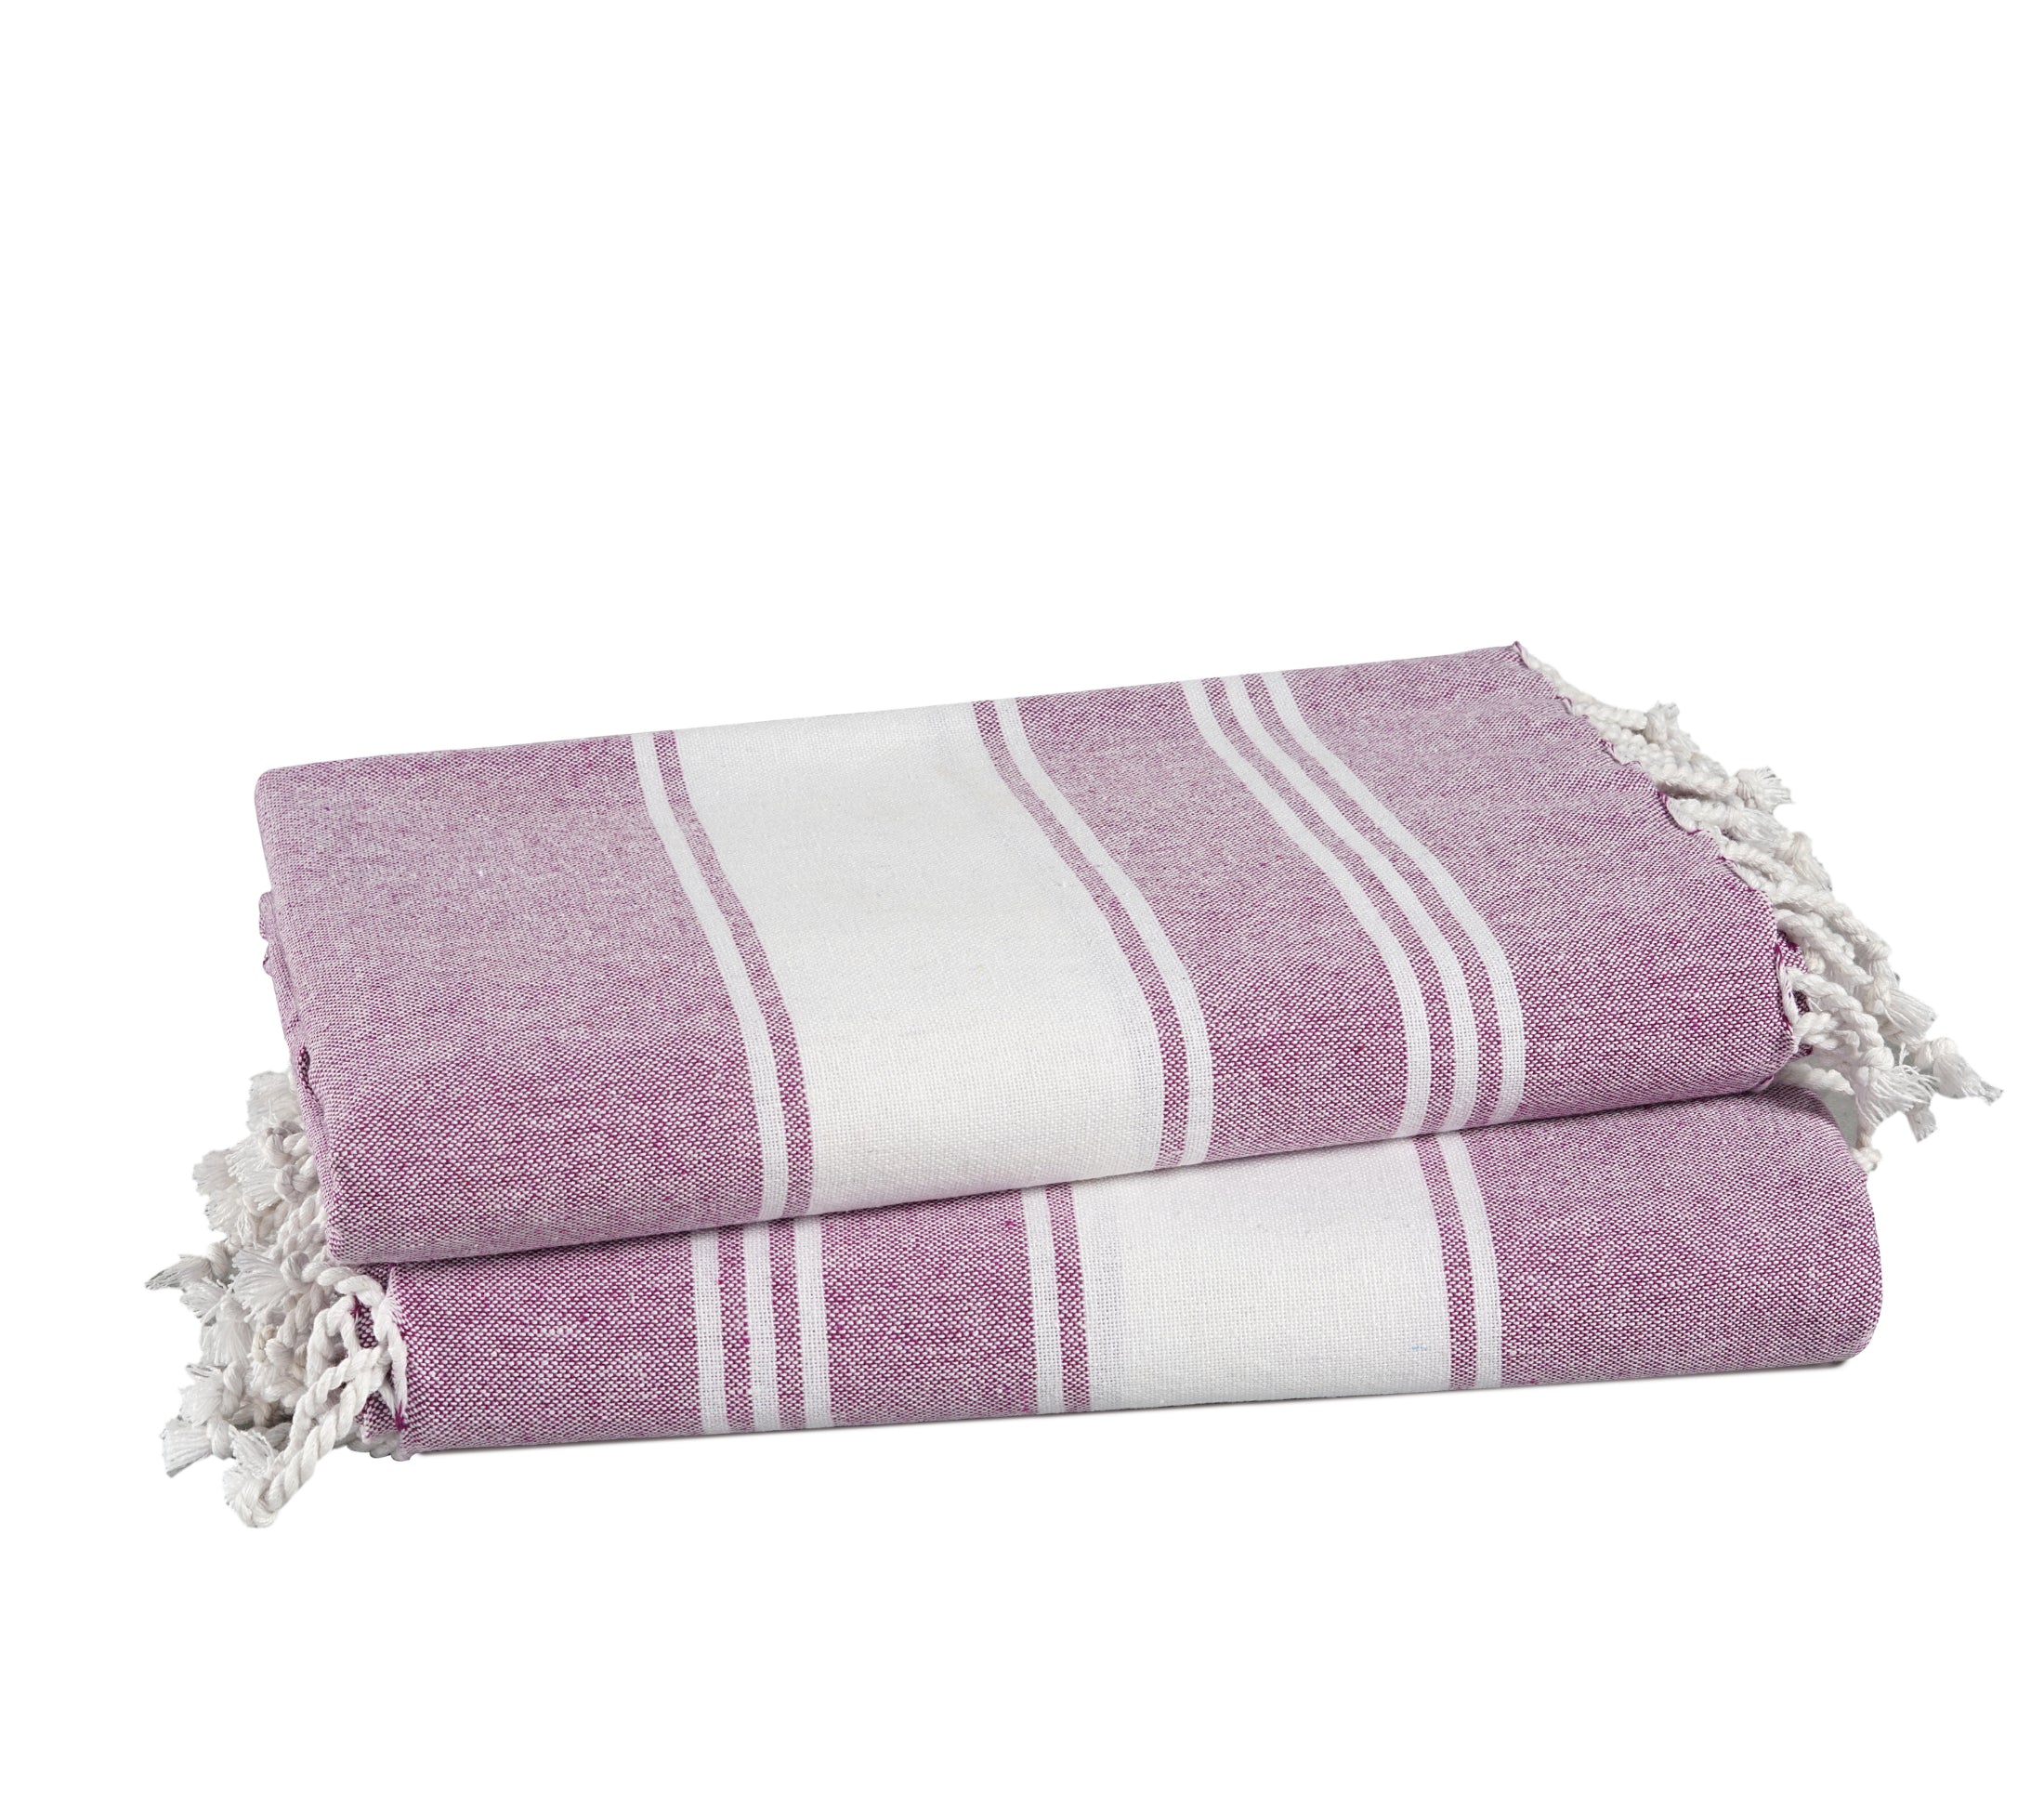 Set of 2 100% Cotton Chambray Turkish Beach Towels - Regal Orchid